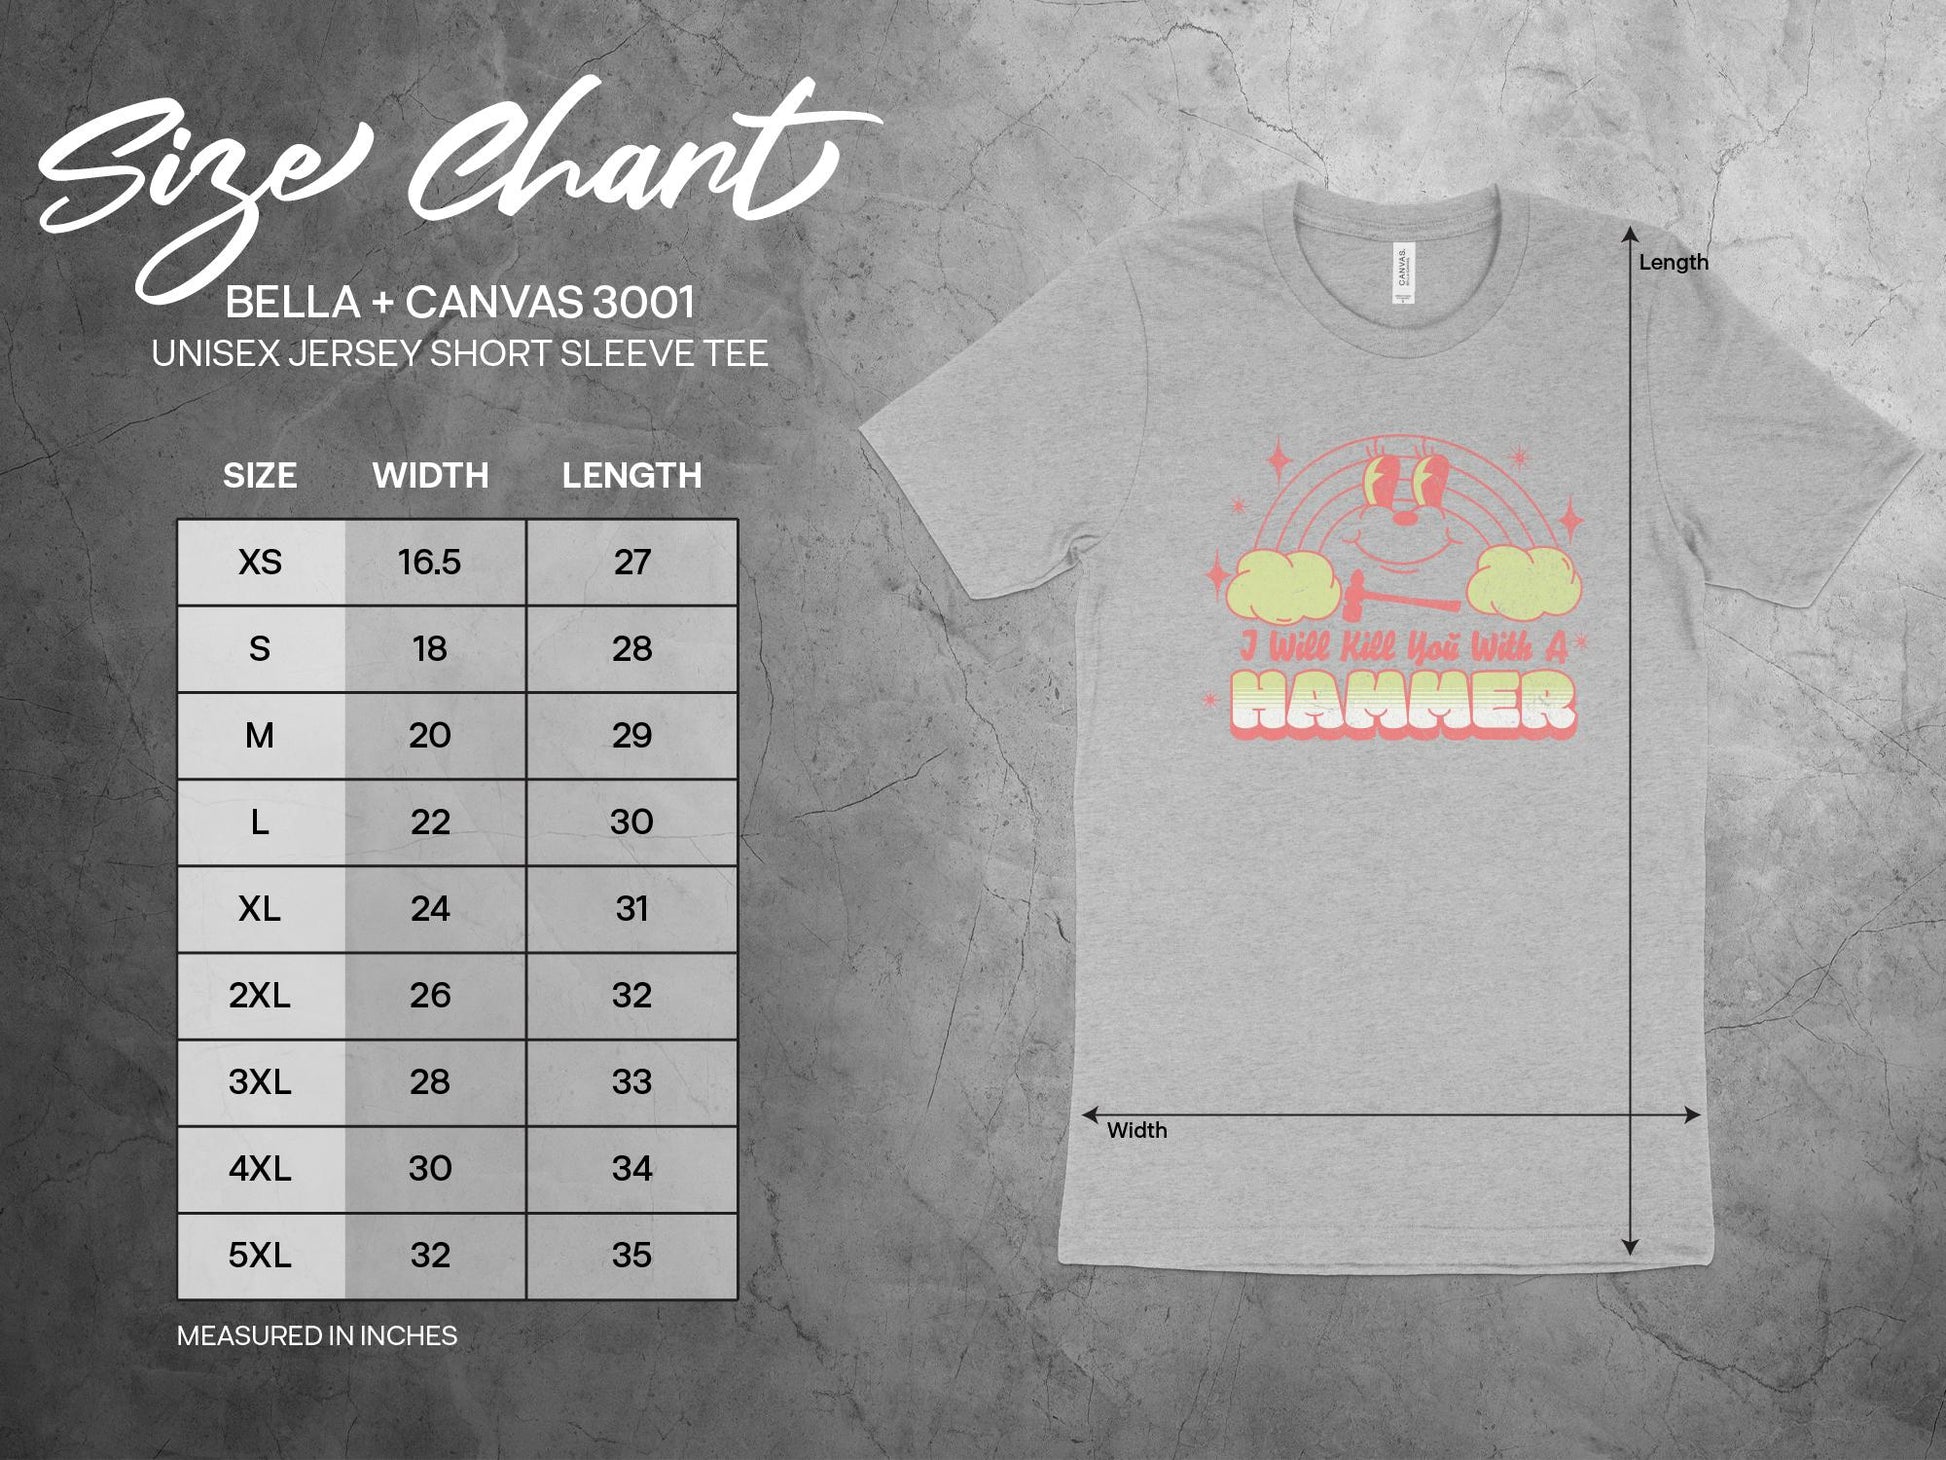 I Will Kill You With a Hammer Shirt, sizing chart